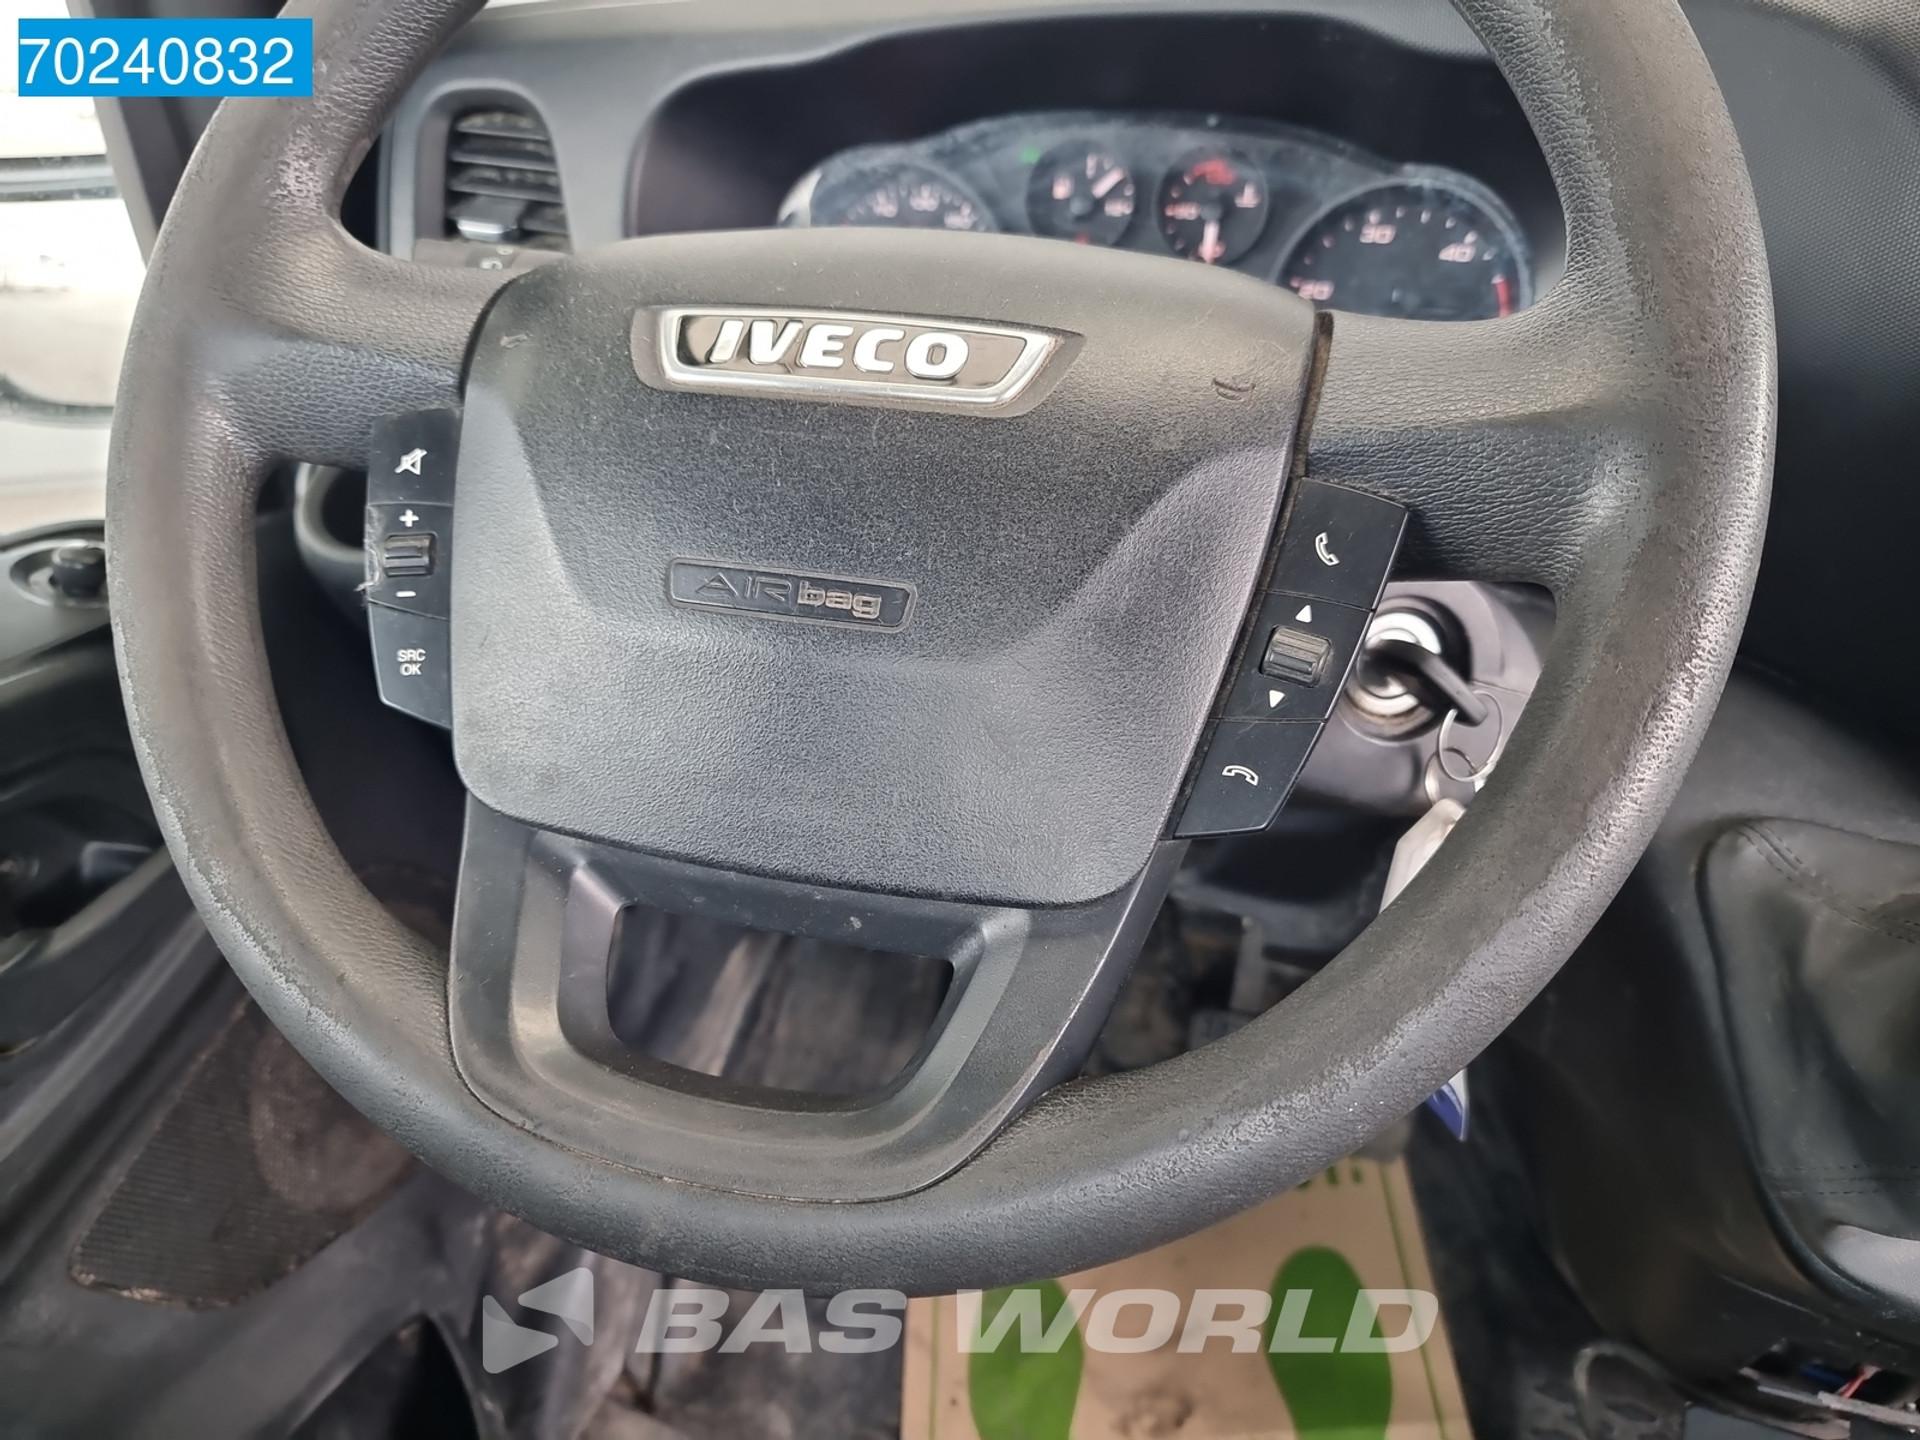 Foto 19 van Iveco Daily 70C21 3.0L 210PK 375cm wheelbase Luchtvering Chassis Cabine Fahrgestell Platform Airco Cruise control